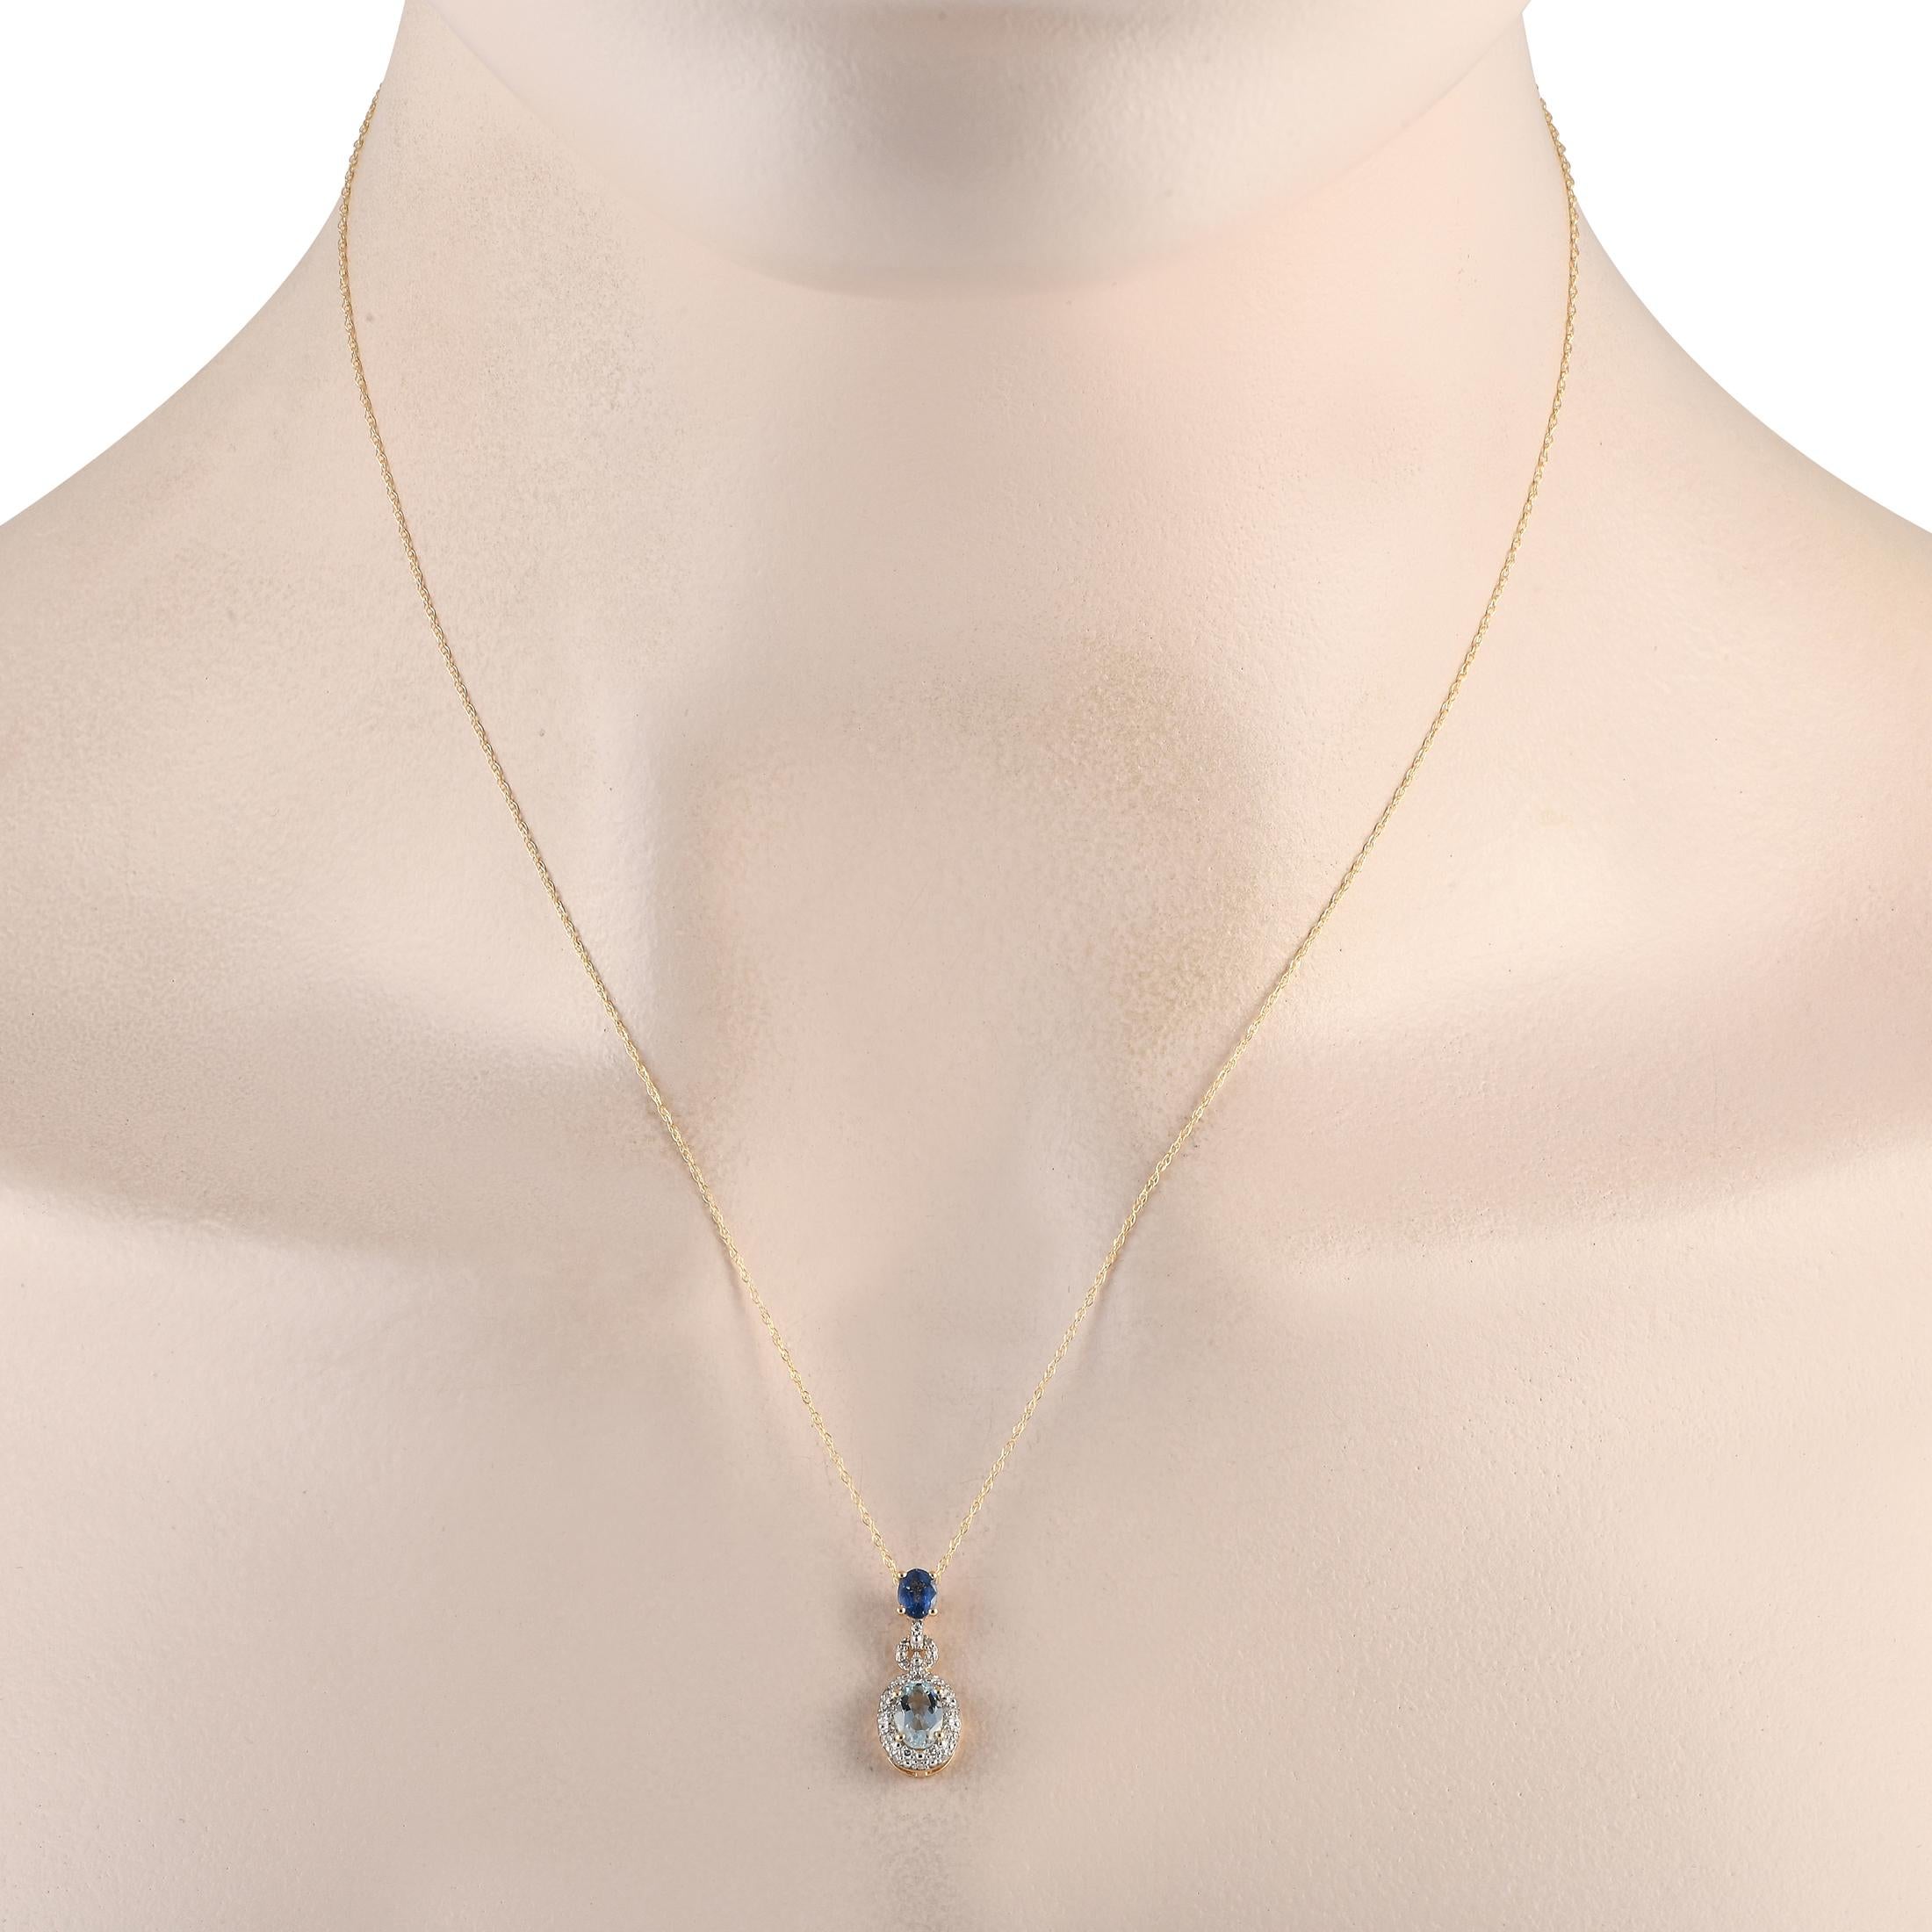 Let this necklace of regal beauty awaken the princess in you. This yellow gold piece features a sapphire bail holding a diamond-traced frame with an aquamarine center. The dainty chain completes the feminine flair of this piece.This brand new LB